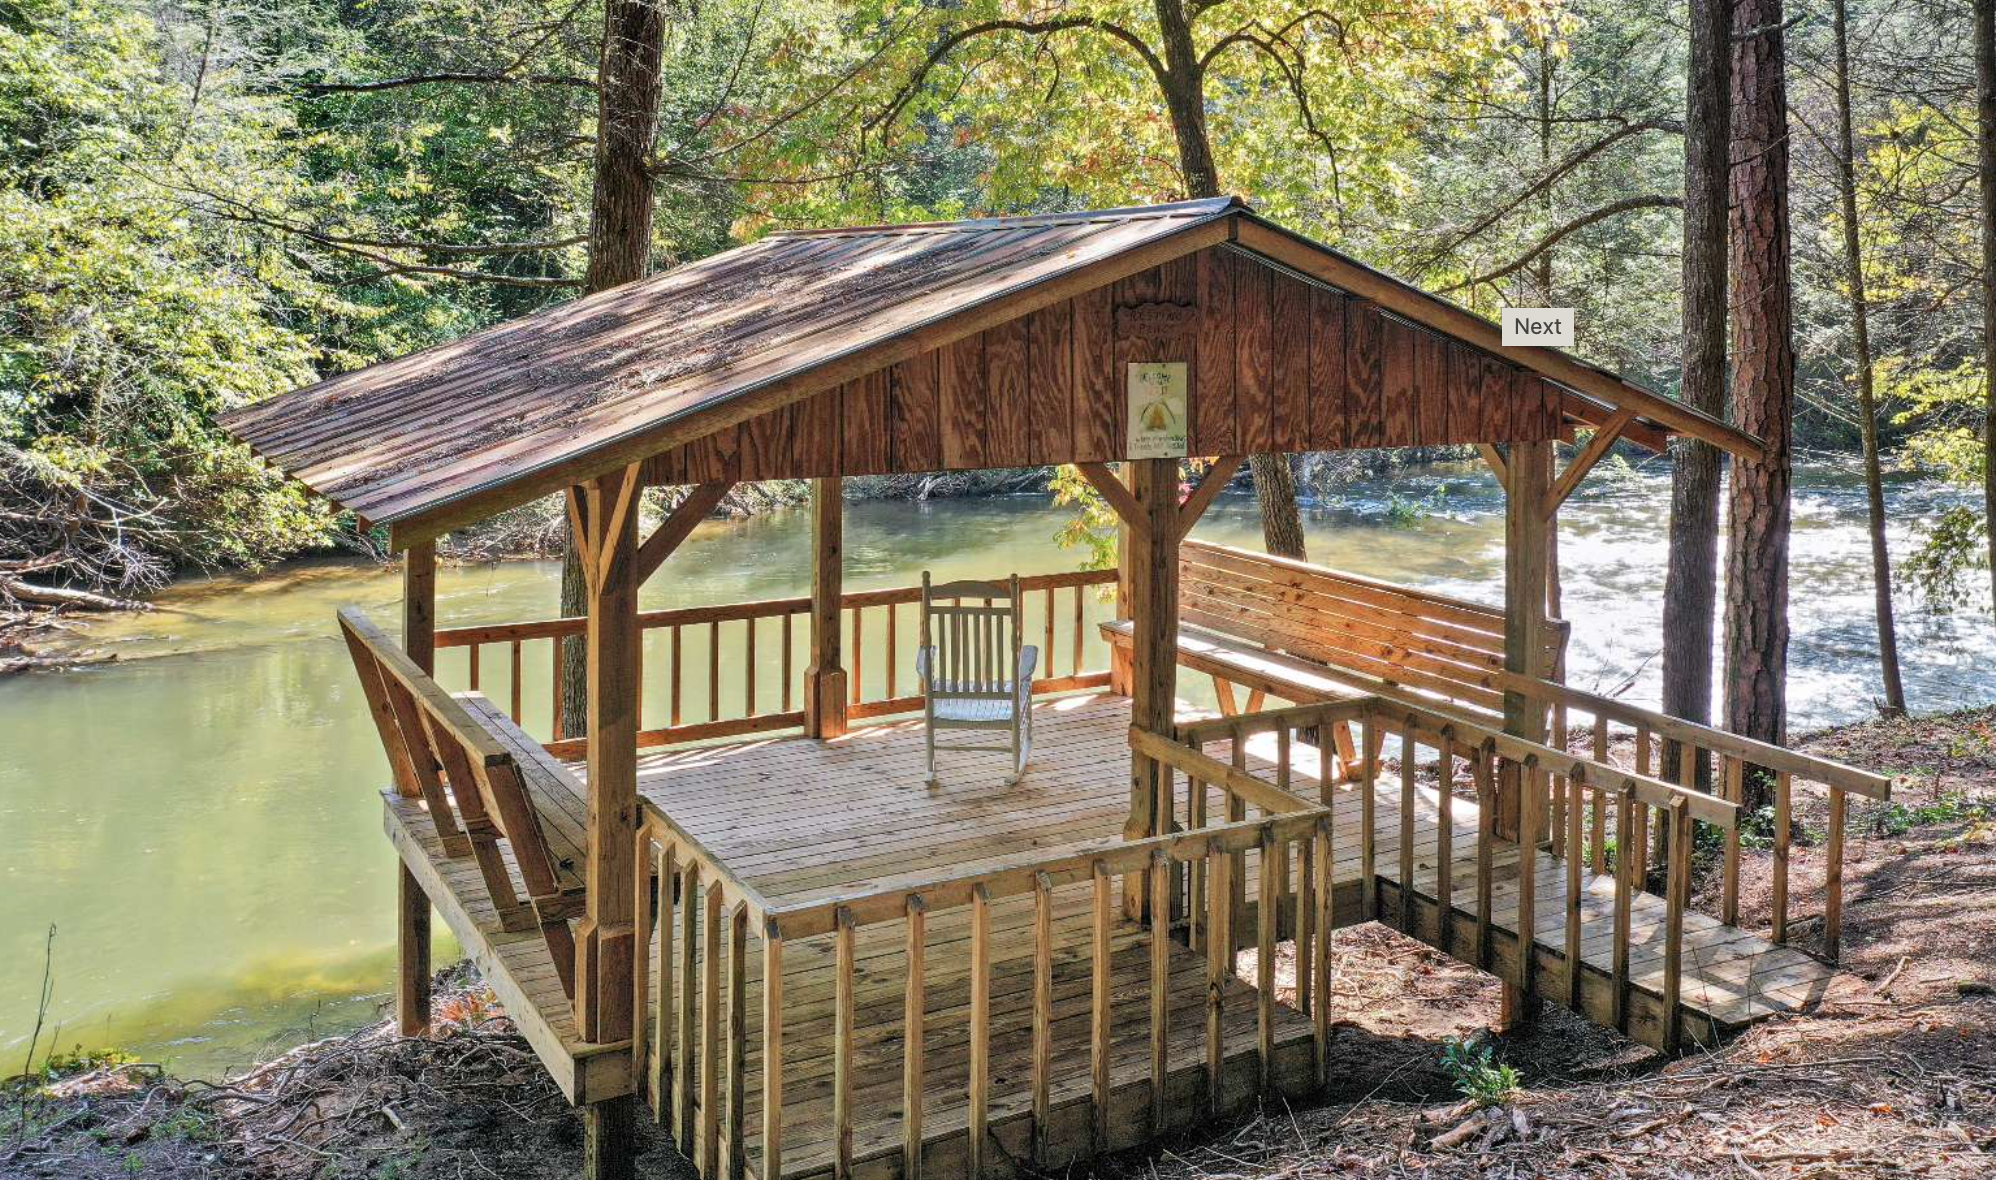 A Gazebo style Dock on the Toccoa River